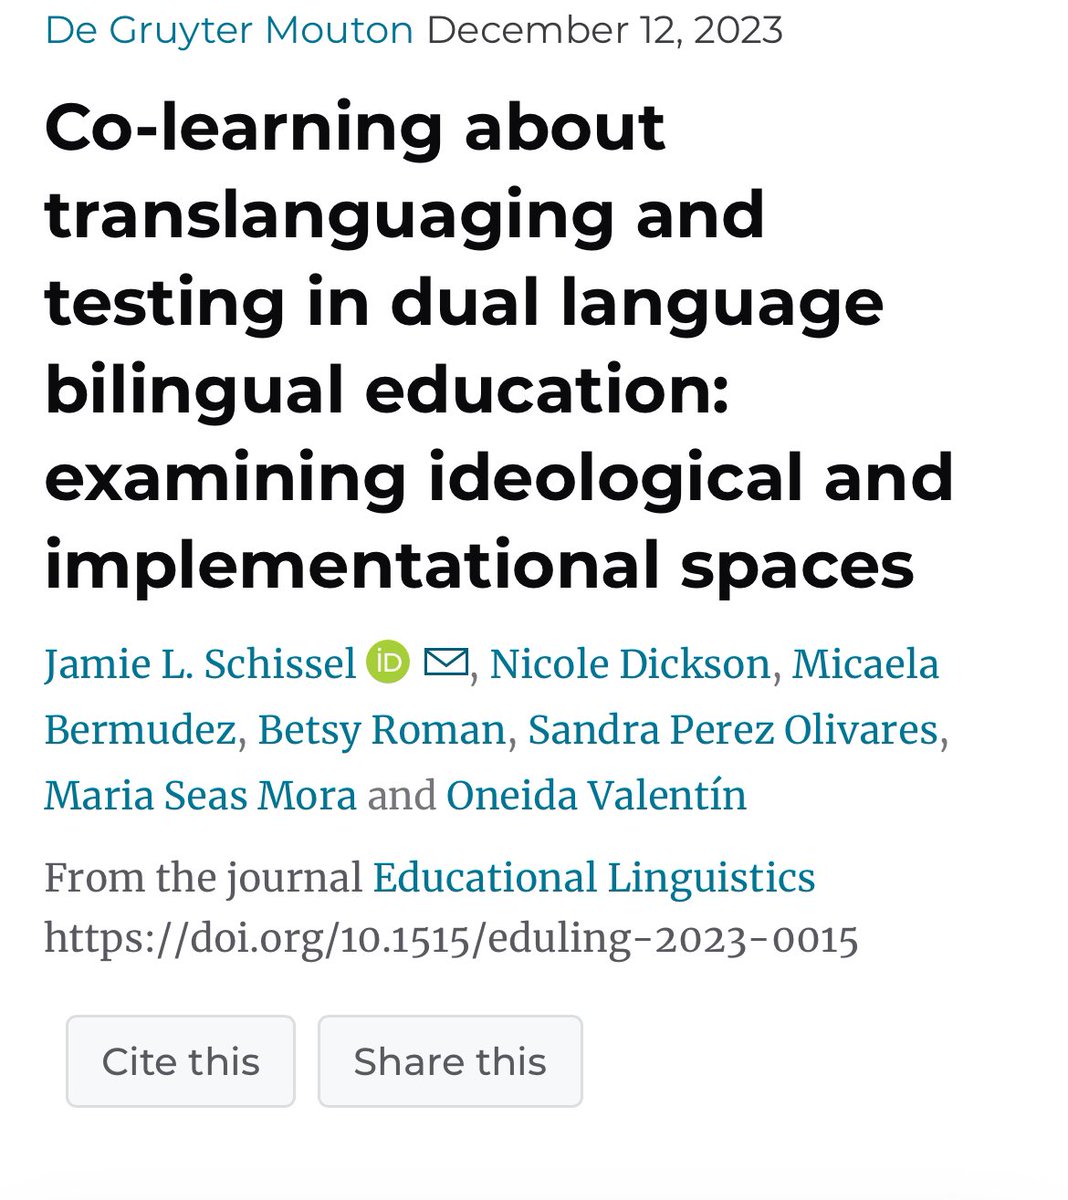 🎉🎉Very excited to announce the publication of our article “Co-learning about translanguaging and testing in DLBE: Examining ideological and implementational spaces” 🎉🎉

A collaboration with UNCG TESOL graduate student alums

degruyter.com/document/doi/1…